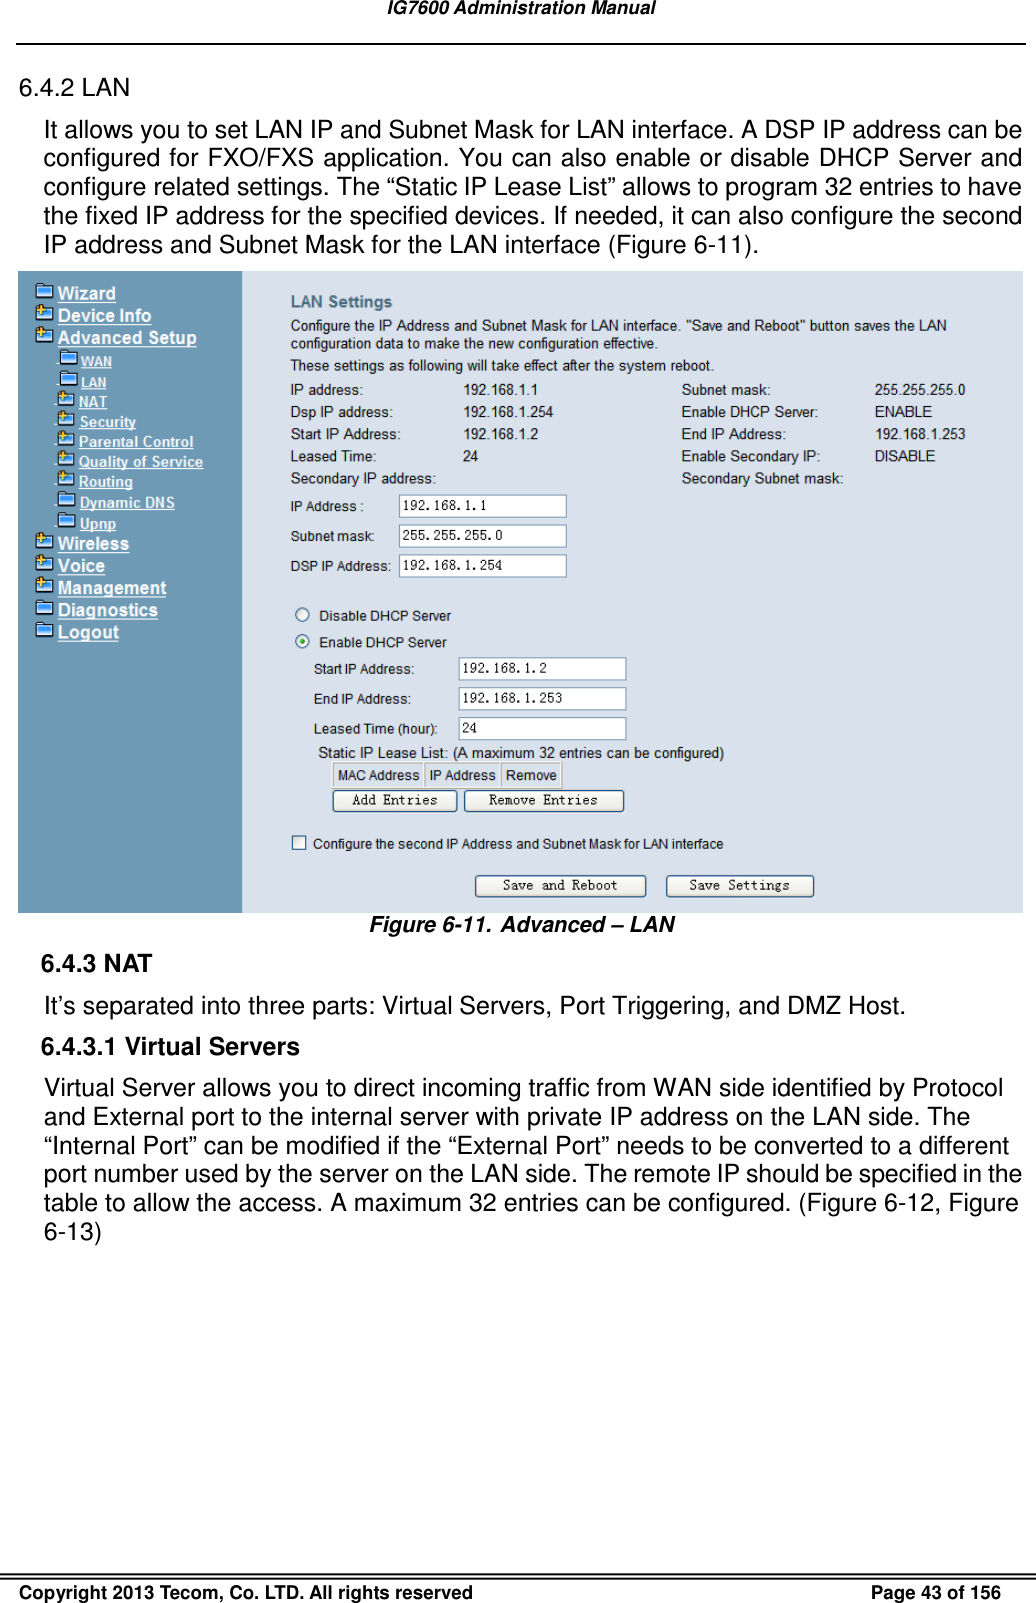 IG7600 Administration Manual  Copyright 2013 Tecom, Co. LTD. All rights reserved  Page 43 of 156 6.4.2 LAN It allows you to set LAN IP and Subnet Mask for LAN interface. A DSP IP address can be configured for FXO/FXS application. You can also enable or disable DHCP Server and configure related settings. The “Static IP Lease List” allows to program 32 entries to have the fixed IP address for the specified devices. If needed, it can also configure the second IP address and Subnet Mask for the LAN interface (Figure 6-11).  Figure 6-11.  Advanced – LAN 6.4.3 NAT It’s separated into three parts: Virtual Servers, Port Triggering, and DMZ Host. 6.4.3.1 Virtual Servers Virtual Server allows you to direct incoming traffic from WAN side identified by Protocol and External port to the internal server with private IP address on the LAN side. The “Internal Port” can be modified if the “External Port” needs to be converted to a different port number used by the server on the LAN side. The remote IP should be specified in the table to allow the access. A maximum 32 entries can be configured. (Figure 6-12, Figure 6-13) 